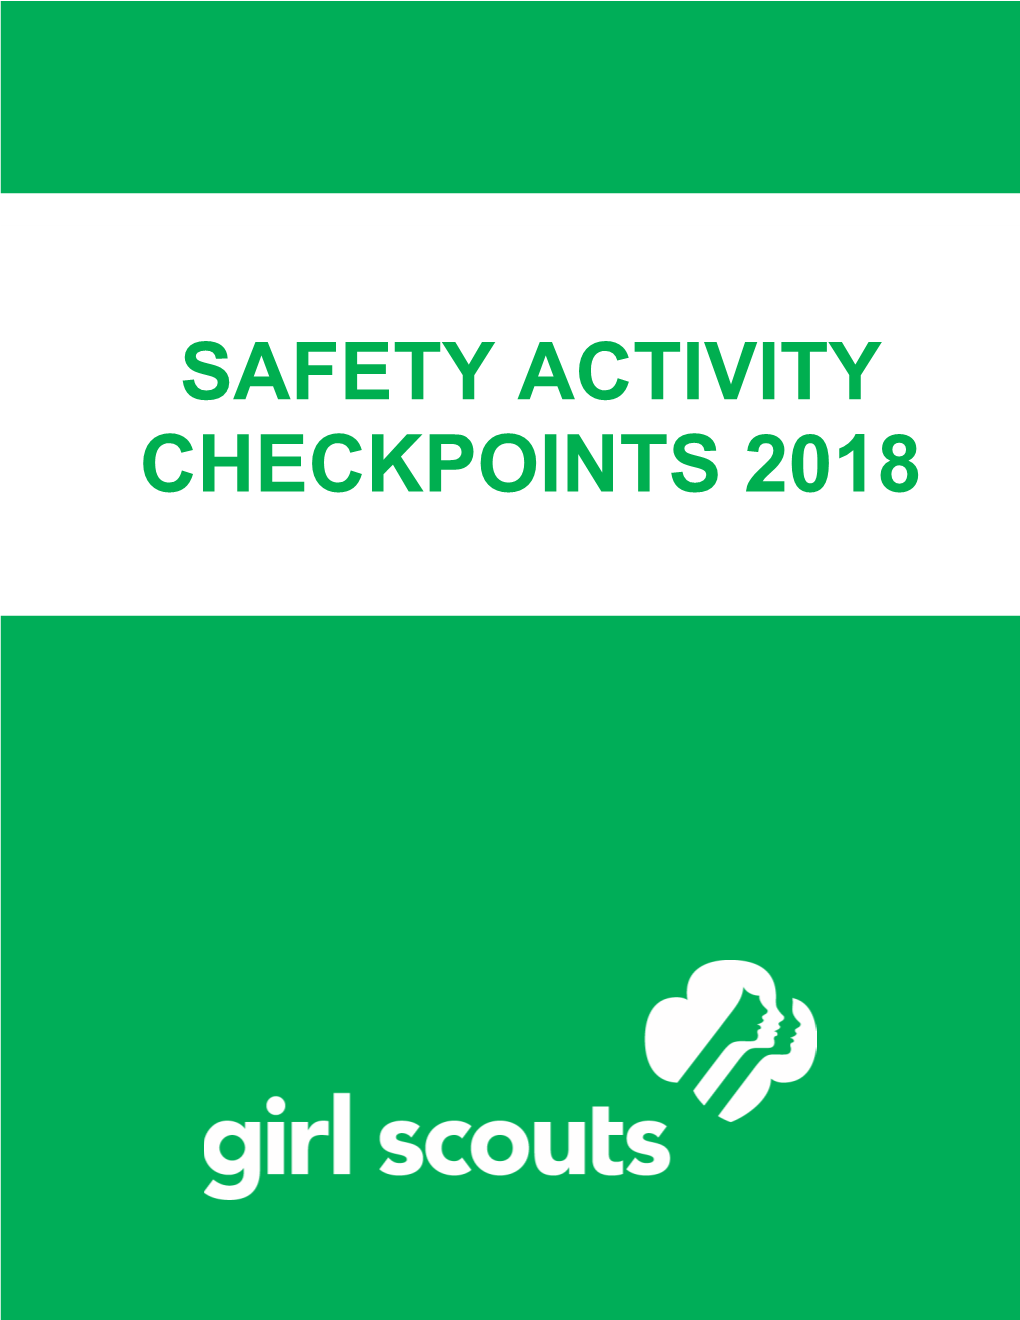 Safety Activity Checkpoints 2018